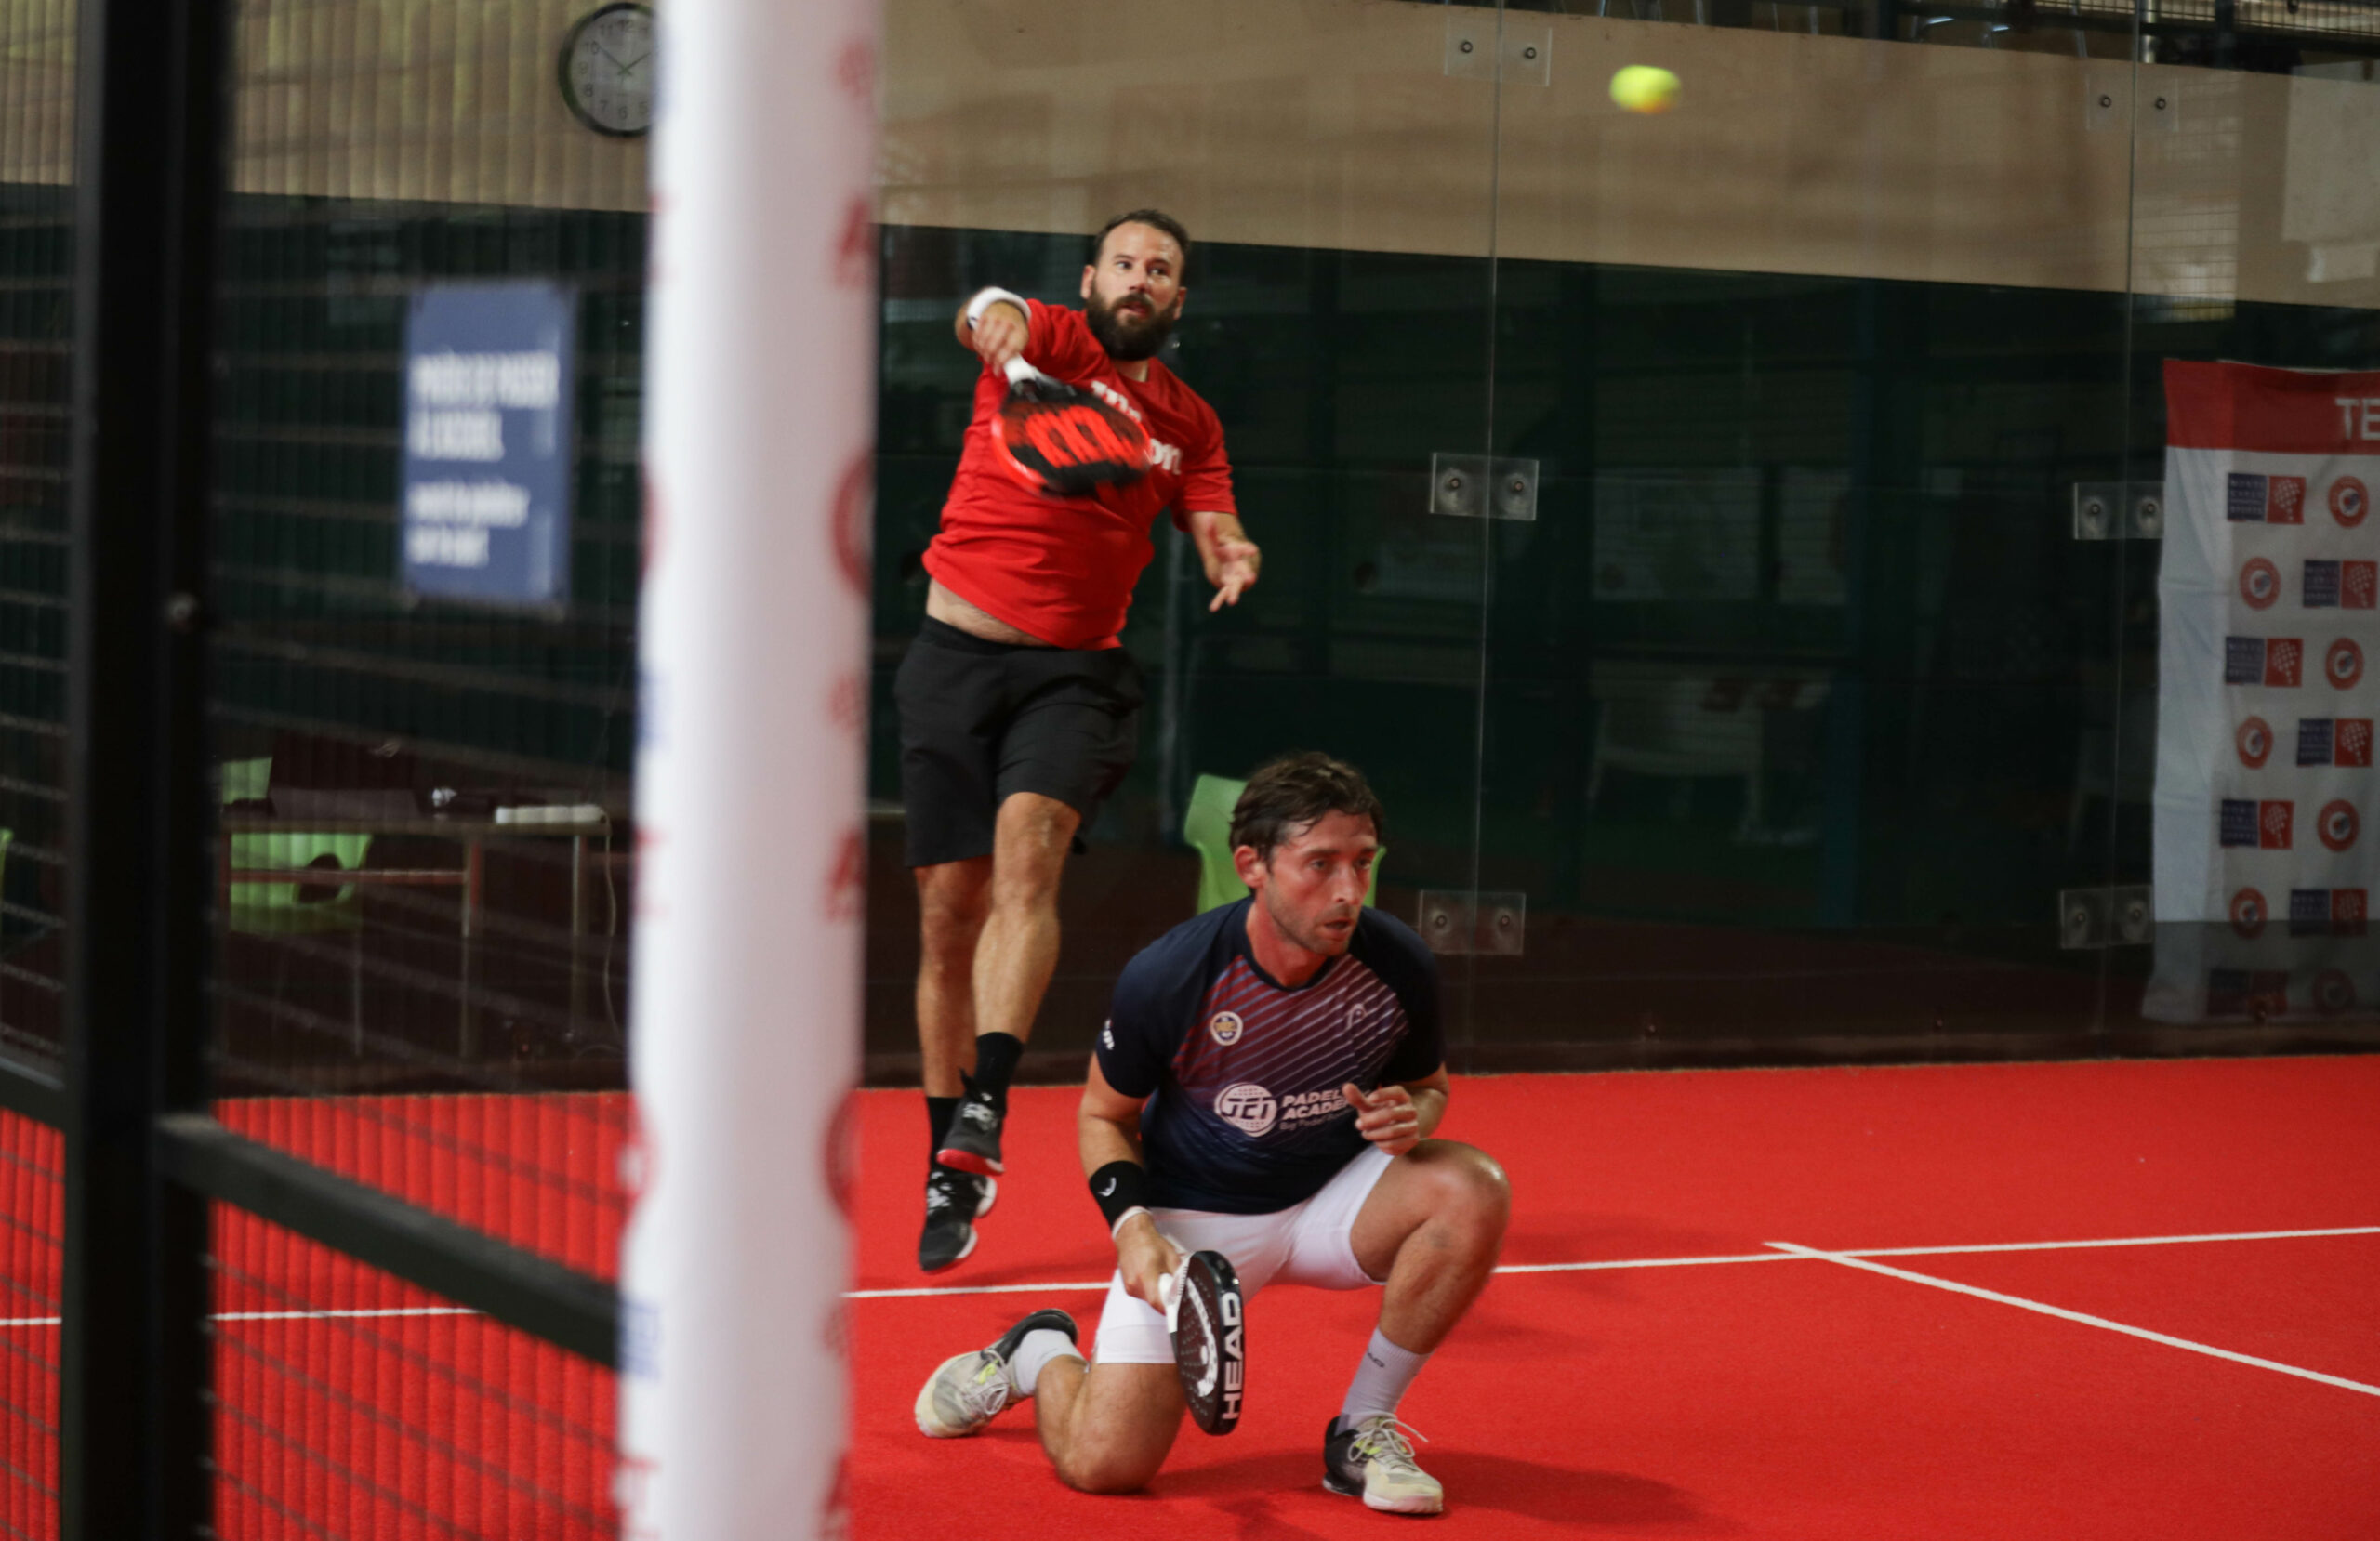 APT Padel Tour - Monaco Master: the French at the gates of the main draw